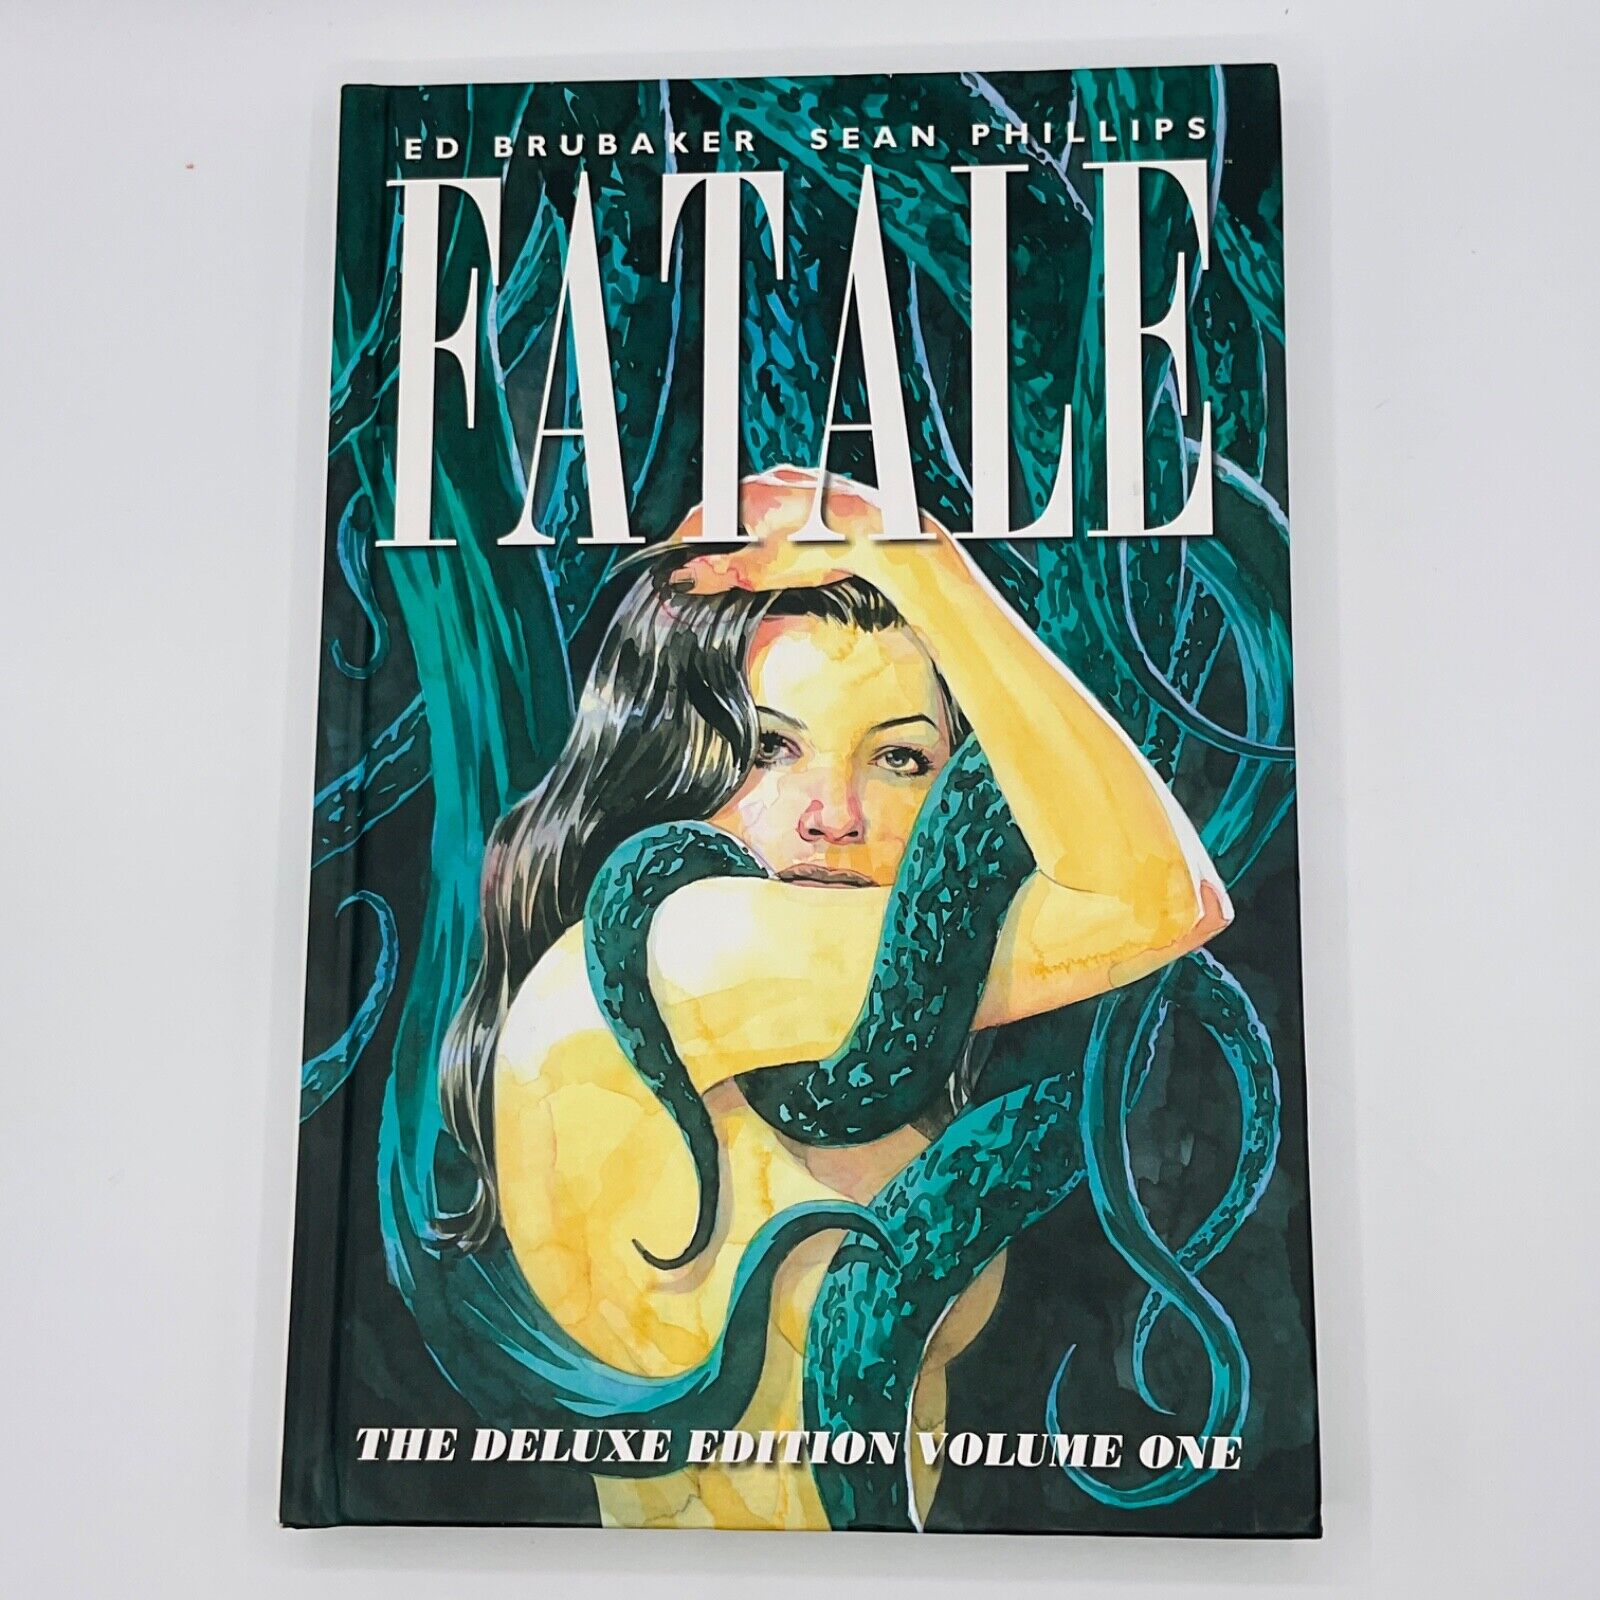 FATALE Hardcover Book DELUXE EDITION VOLUME 1 By Ed Brubaker Sean Phillips